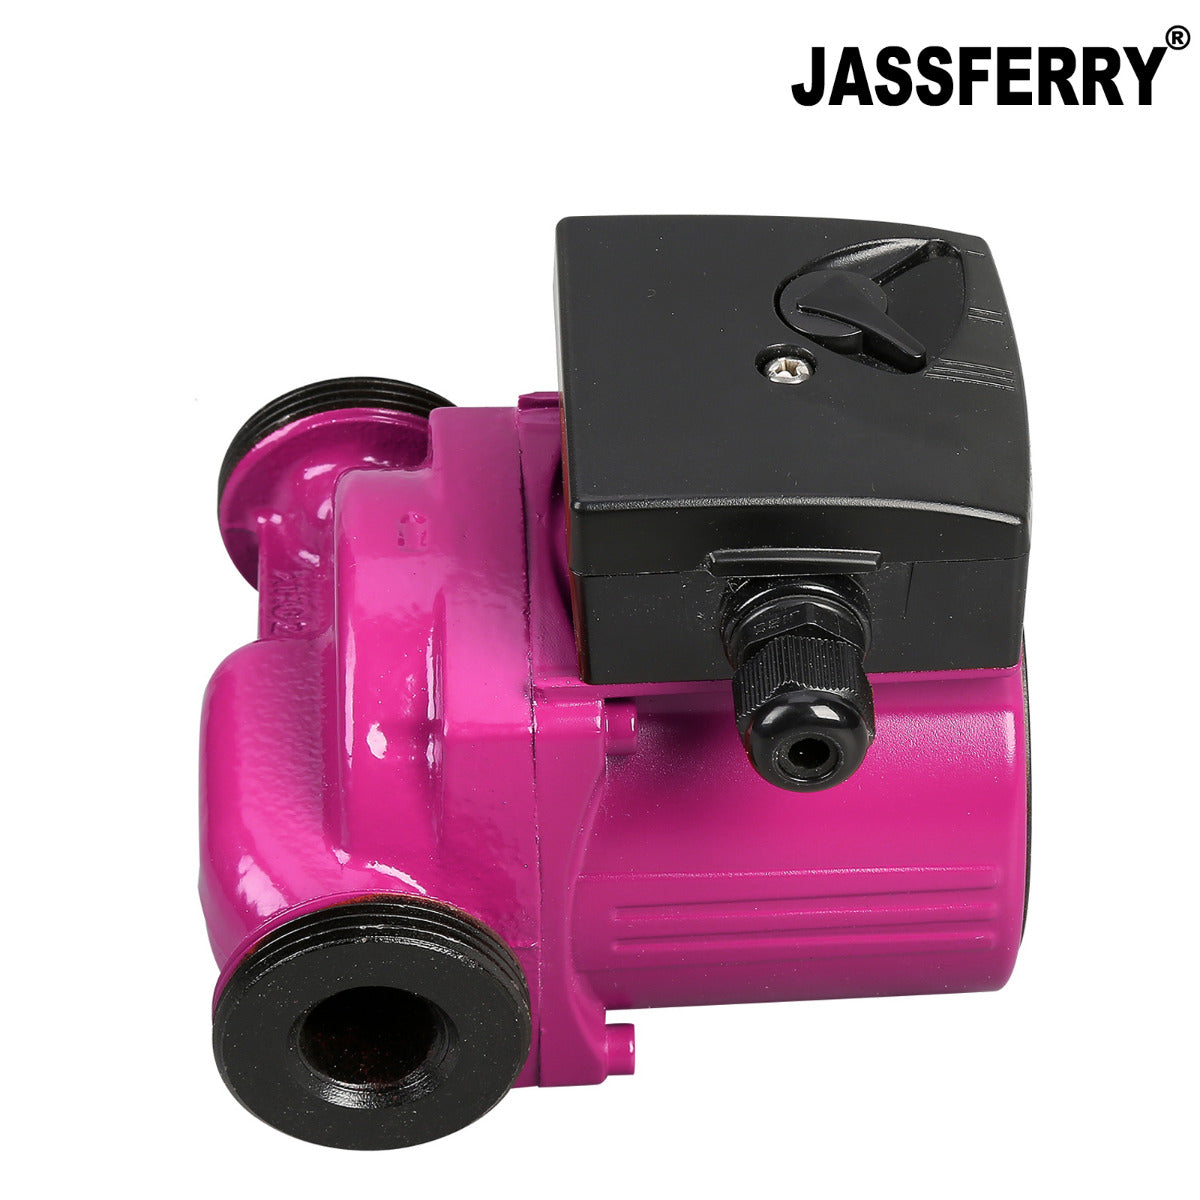 JassferryJASSFERRY New Heating Pump Hot Water Circulating Central System ReplacementHeating Pumps